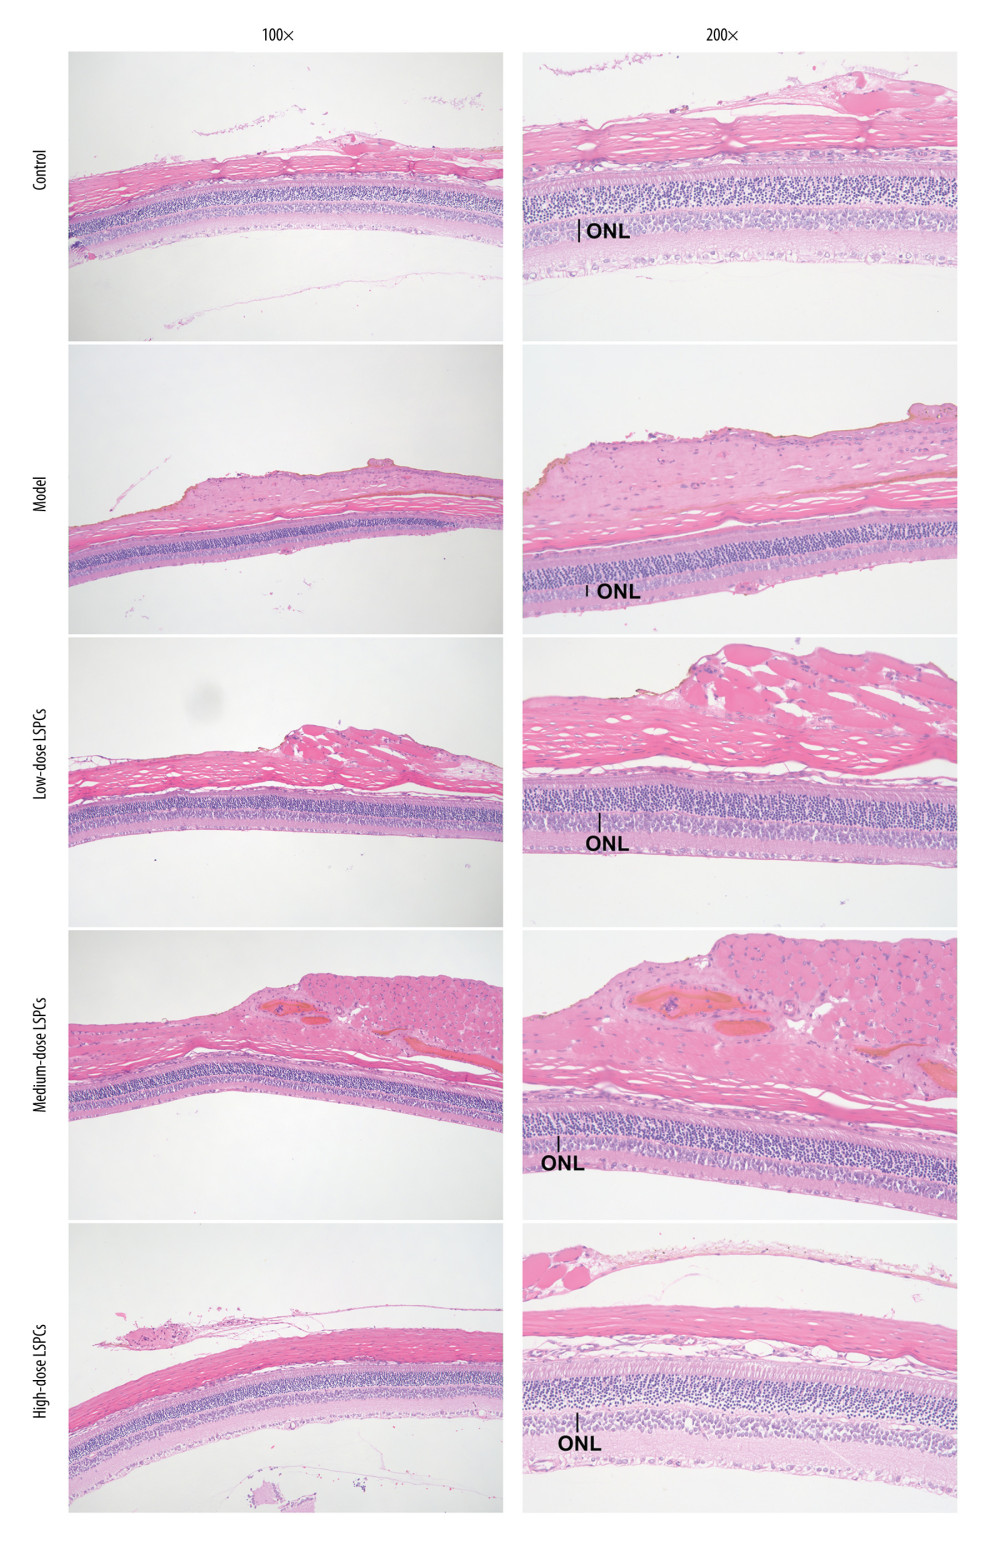 Protective roles of LSPCs on retinal structure in light-induced retinal damage rats. Histological analysis was carried out utilizing H&E staining. Representative images of H&E staining of control, light exposure-induced retinal injury model, low-, medium-, and high-dose LSPCs groups were shown, separately. Magnification, 100× or 200× bar value, 50 or 100 μm. Olympus software (version 2.2; Olympus, Japan) was used to create the pictures.